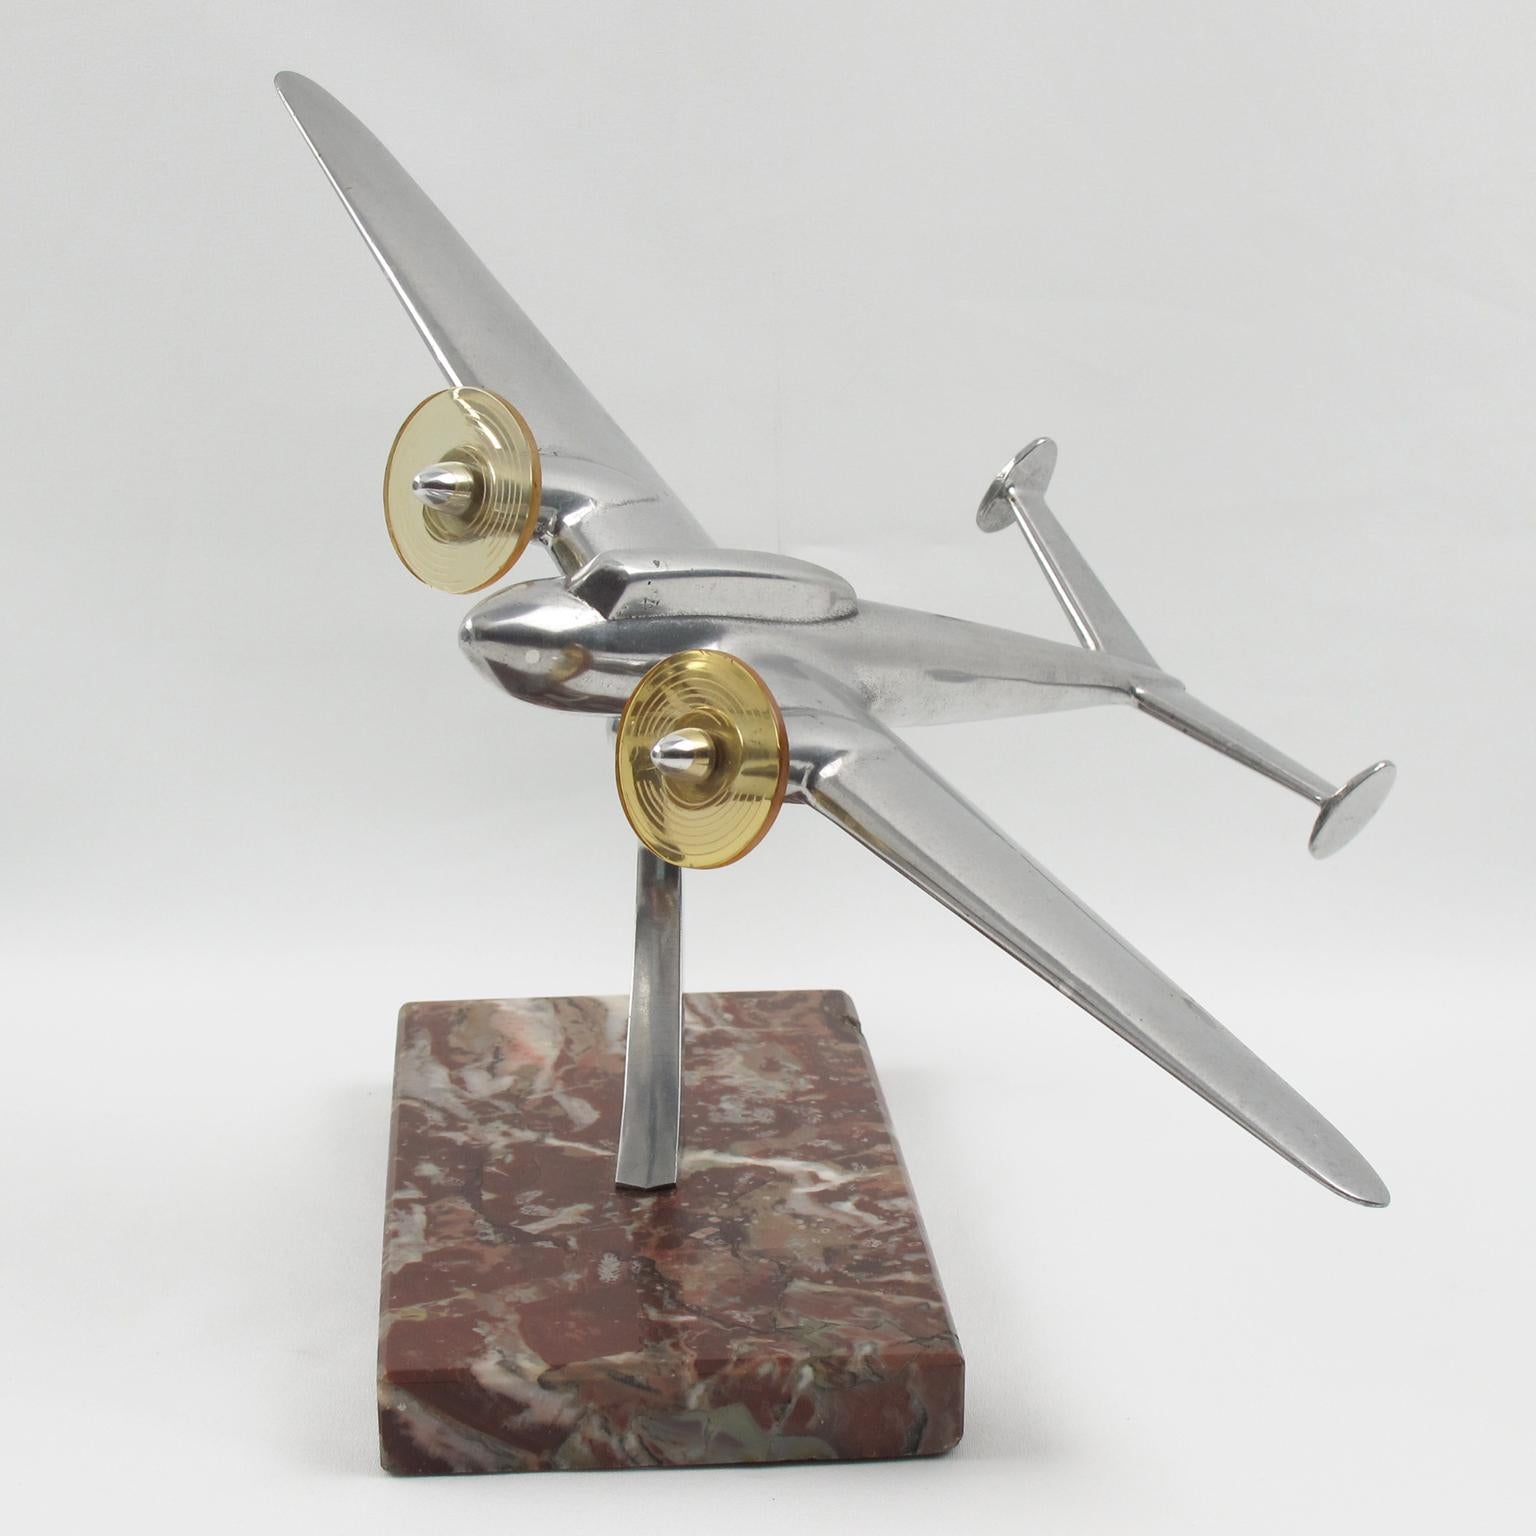 Elegant French aluminum airplane model, mounted on a marble plinth. This nice sculptural model airplane is made with cast aluminum and has two original Lucite propellers. Standing on a geometric marble plinth in warm red/brown swirl color with